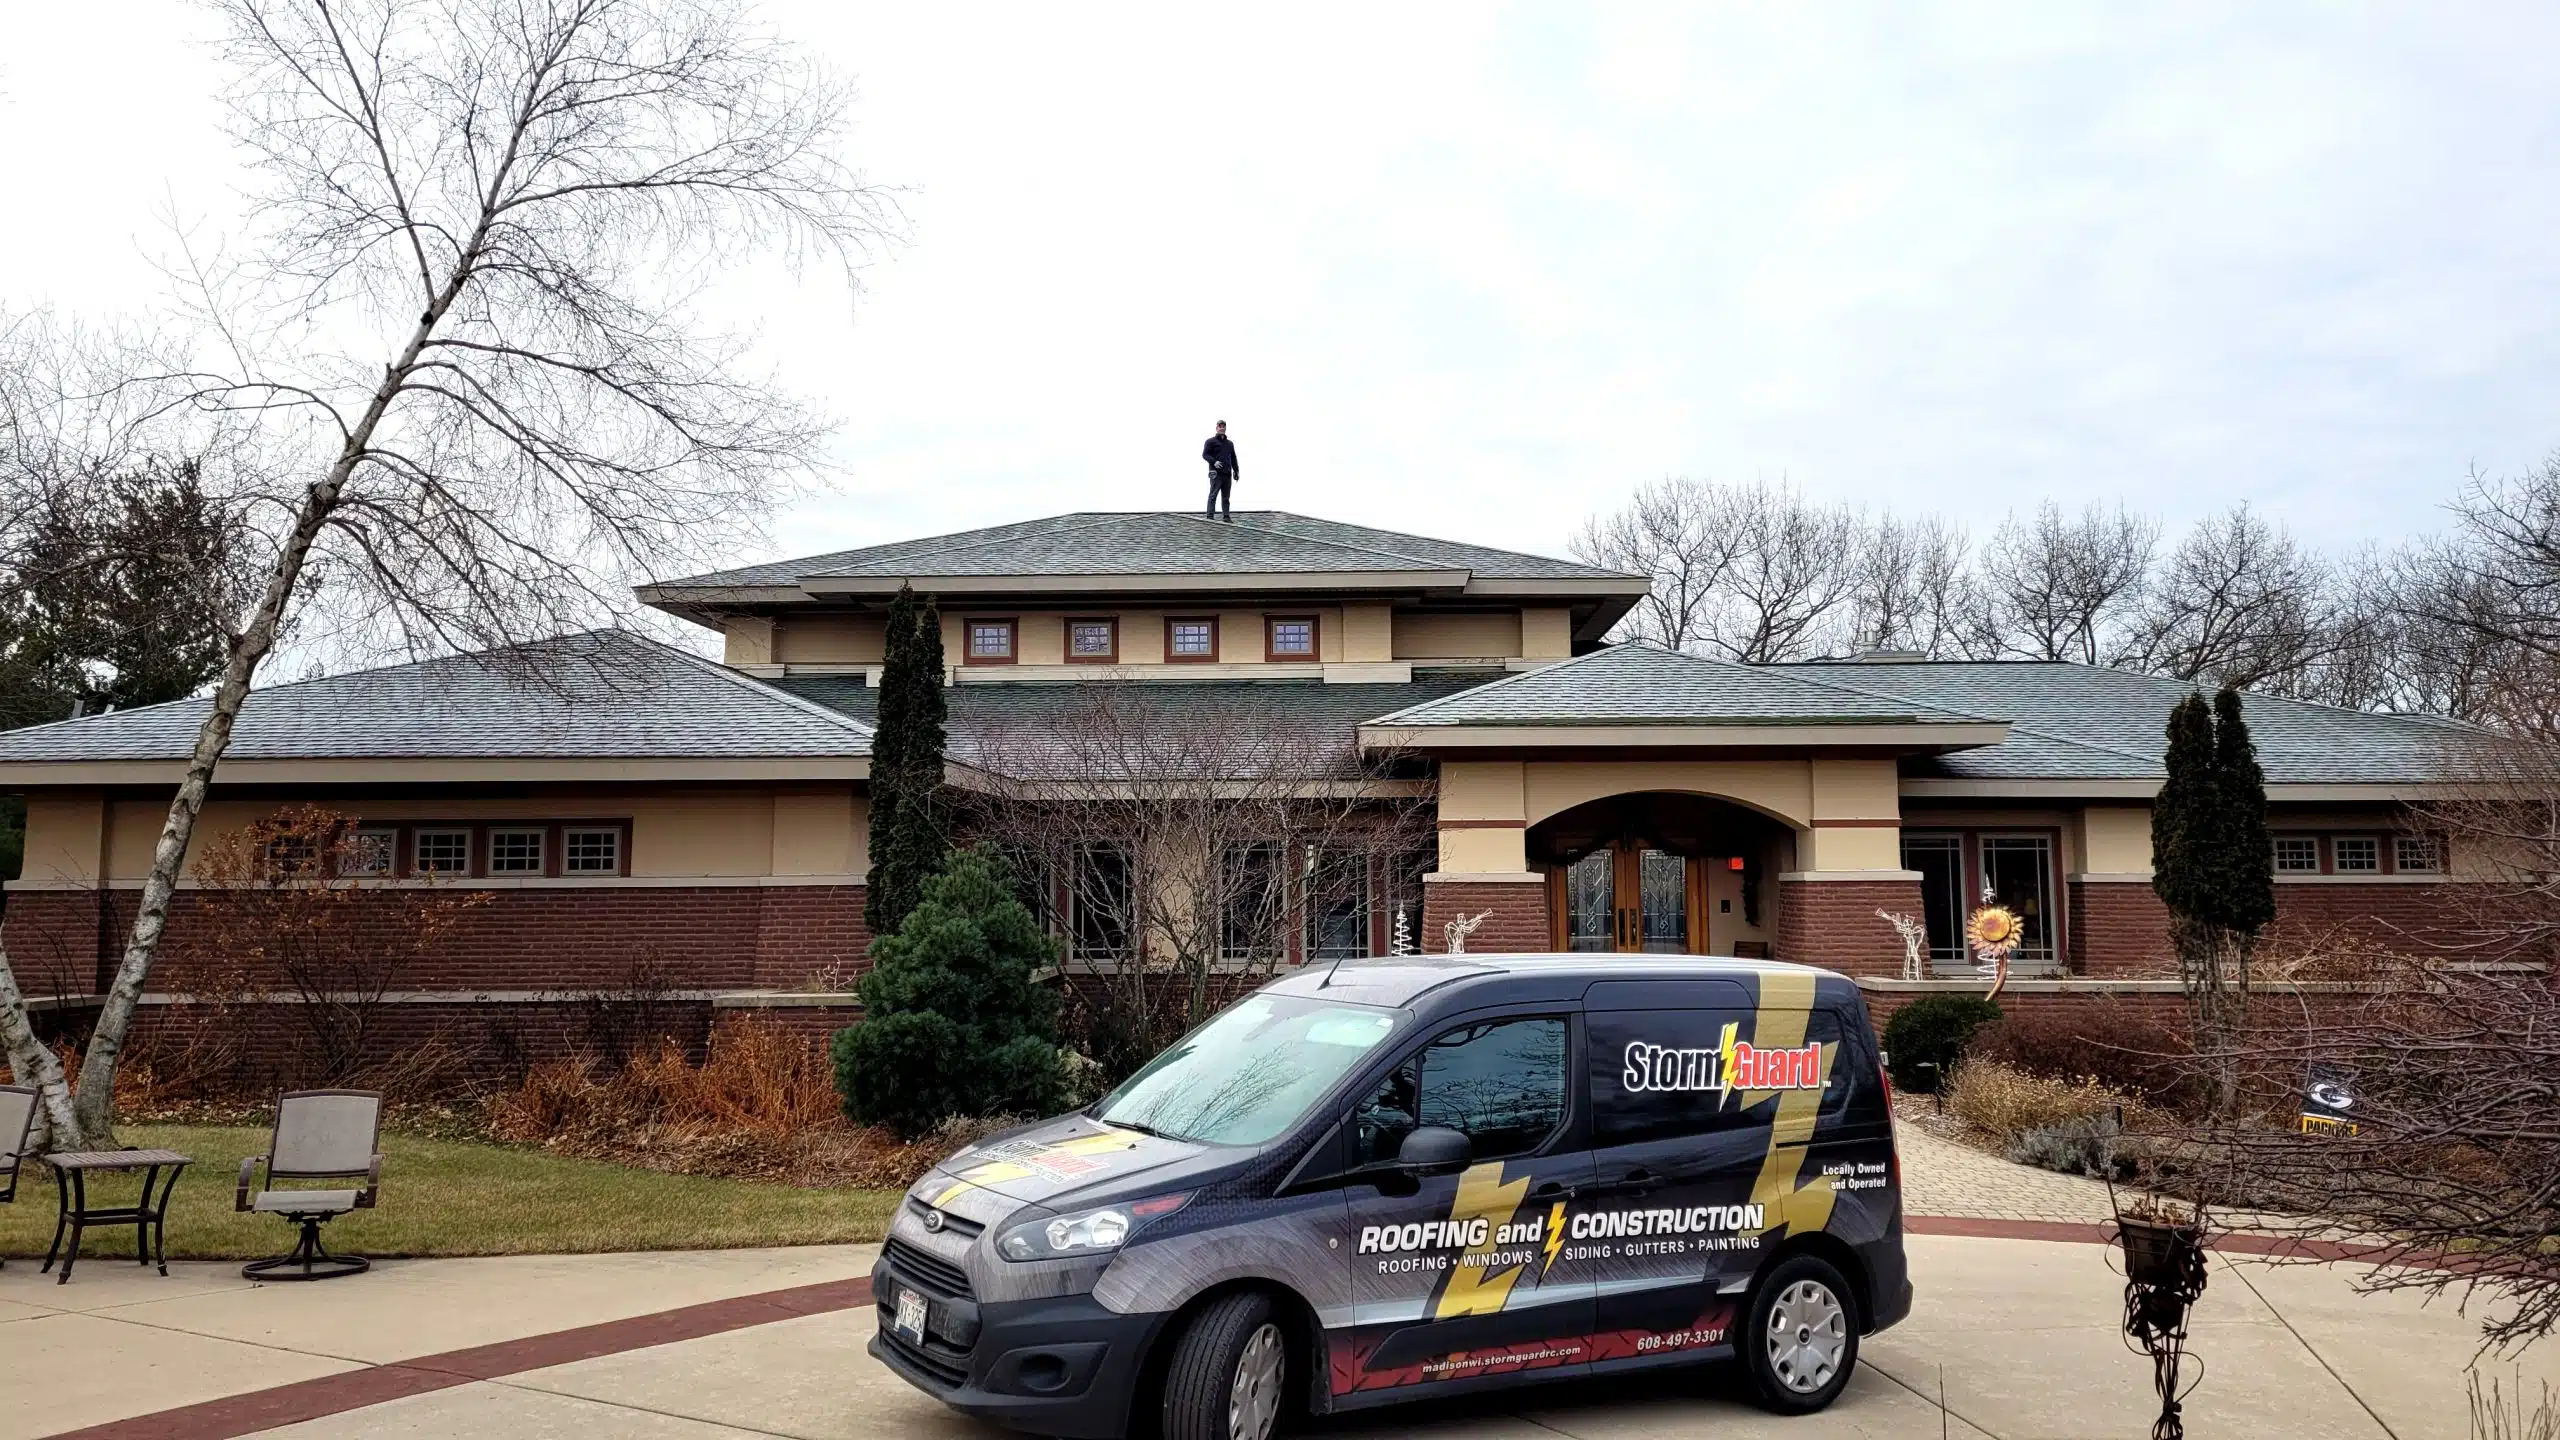 Brick House with Storm Guard Restoration Services Truck In Driveway - Madison